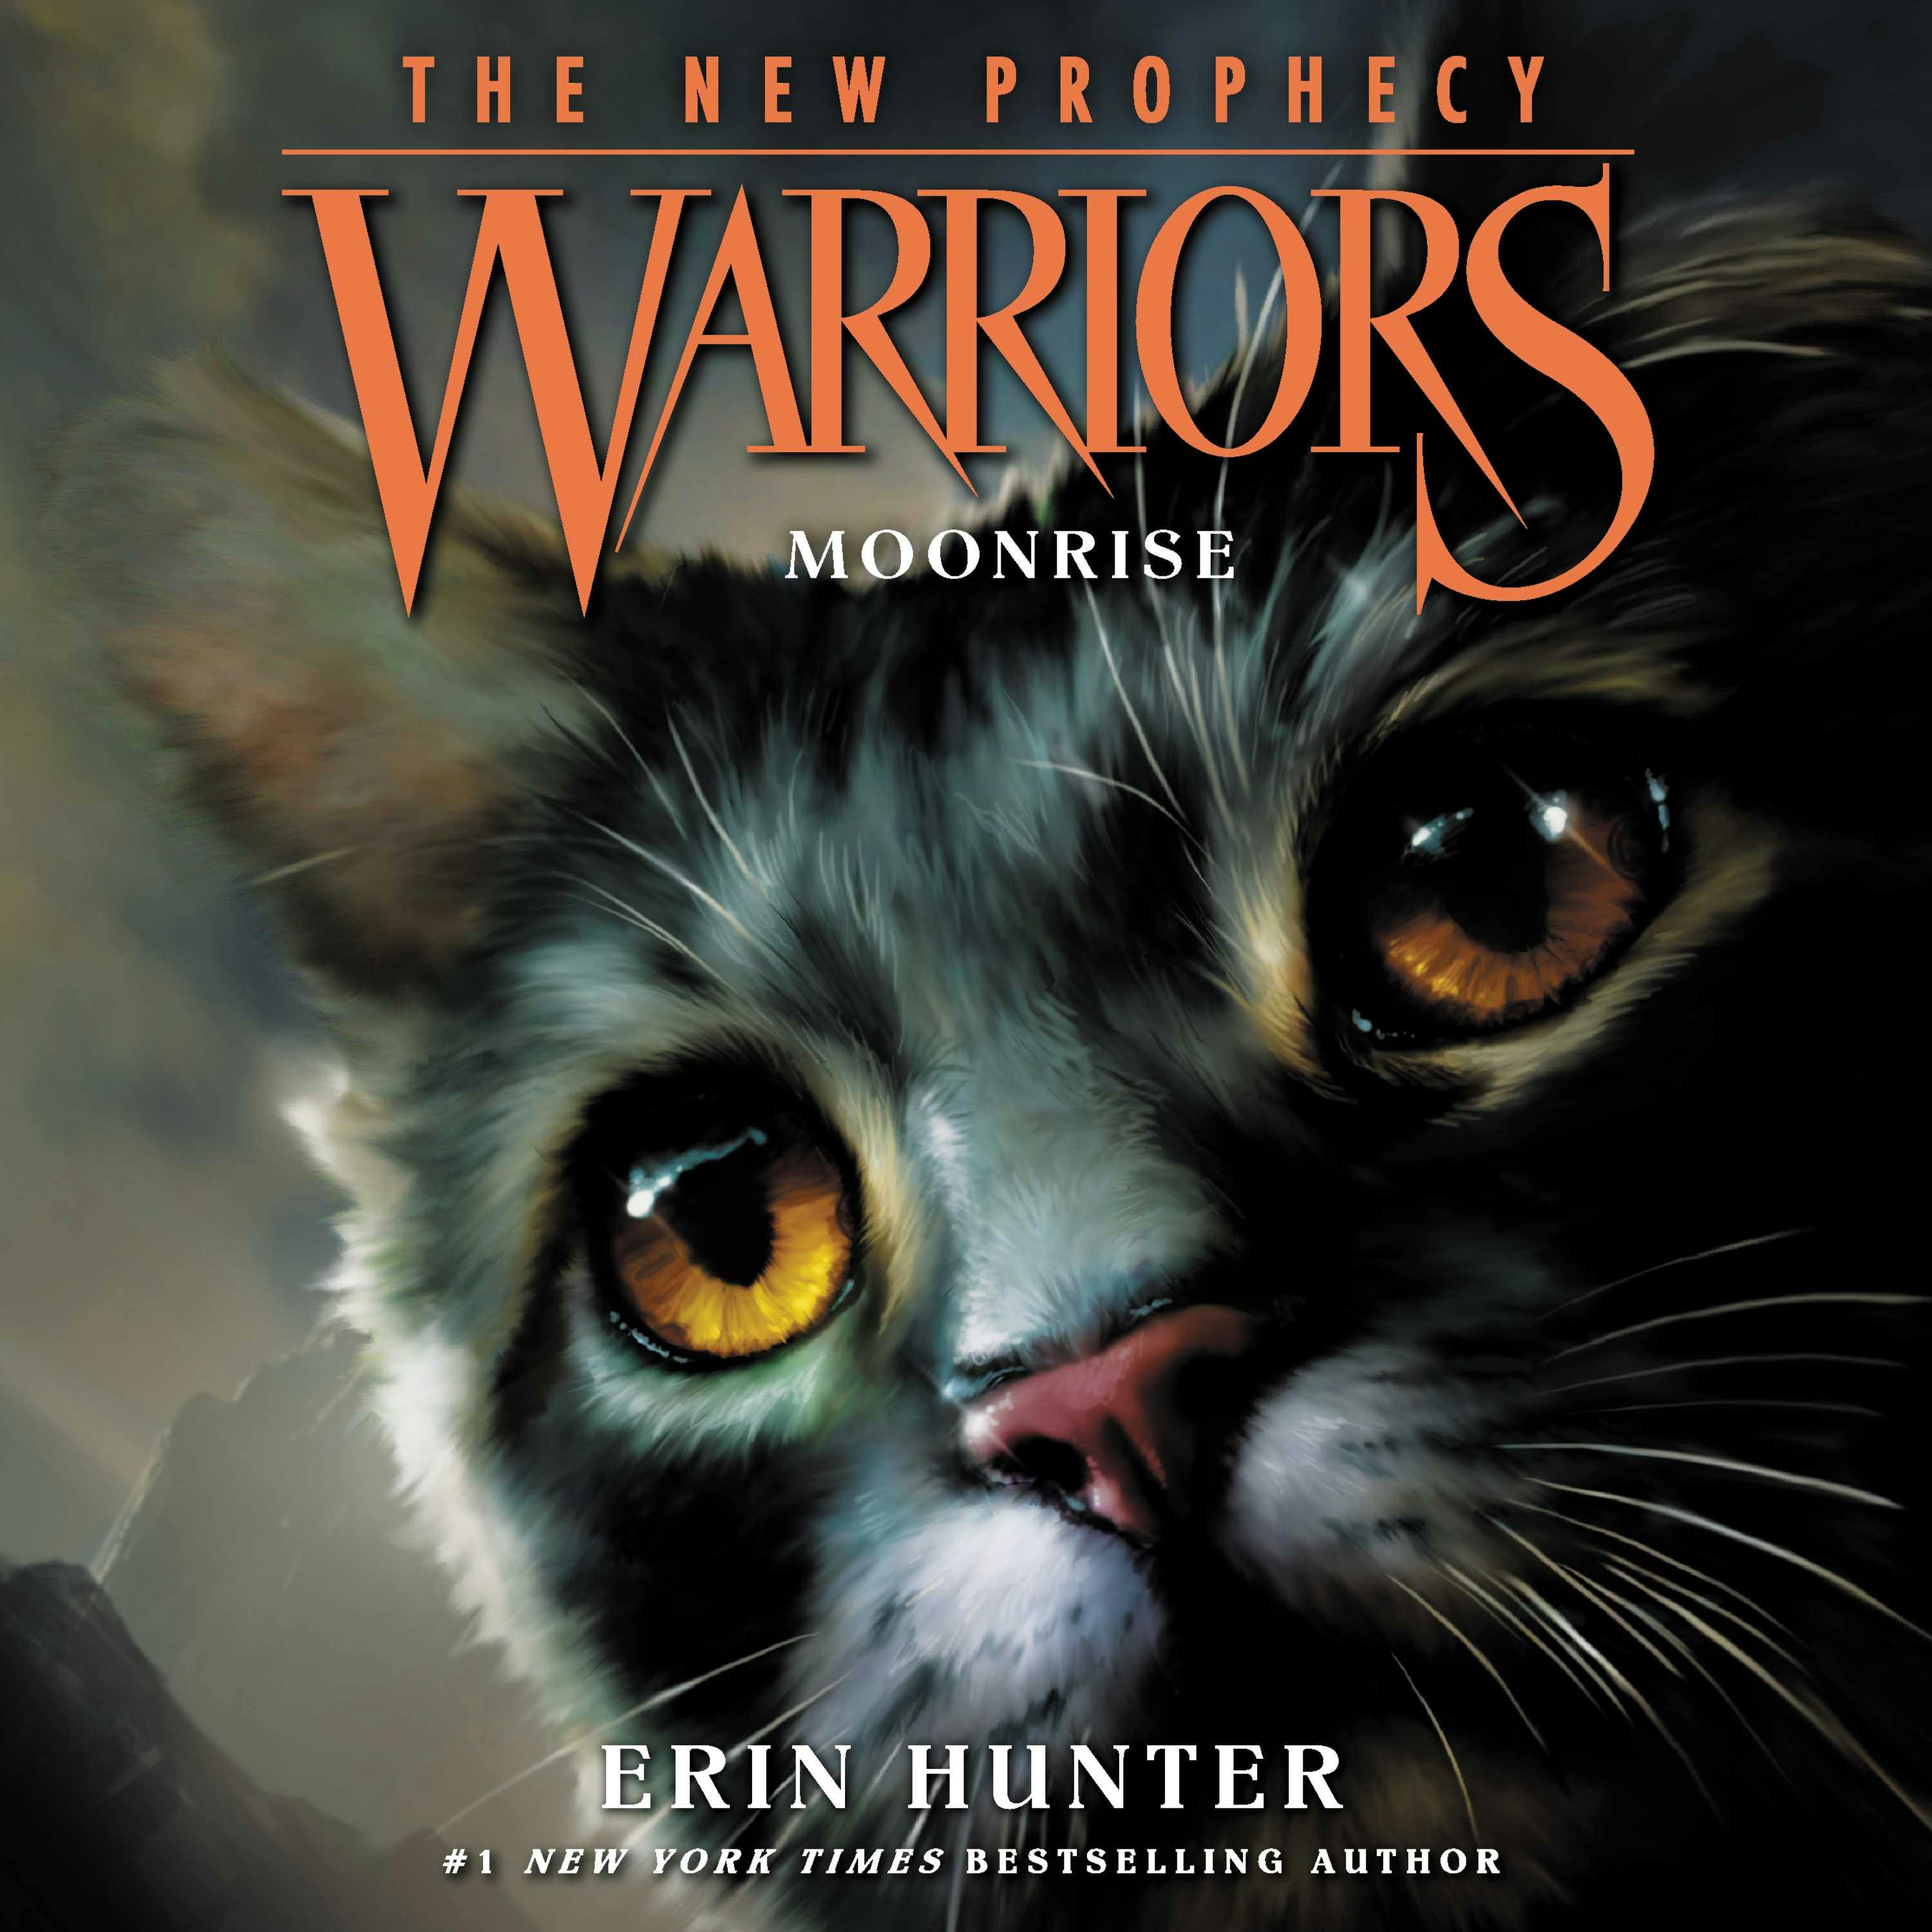 Warriors: The New Prophecy #2: Moonrise - Erin Hunter